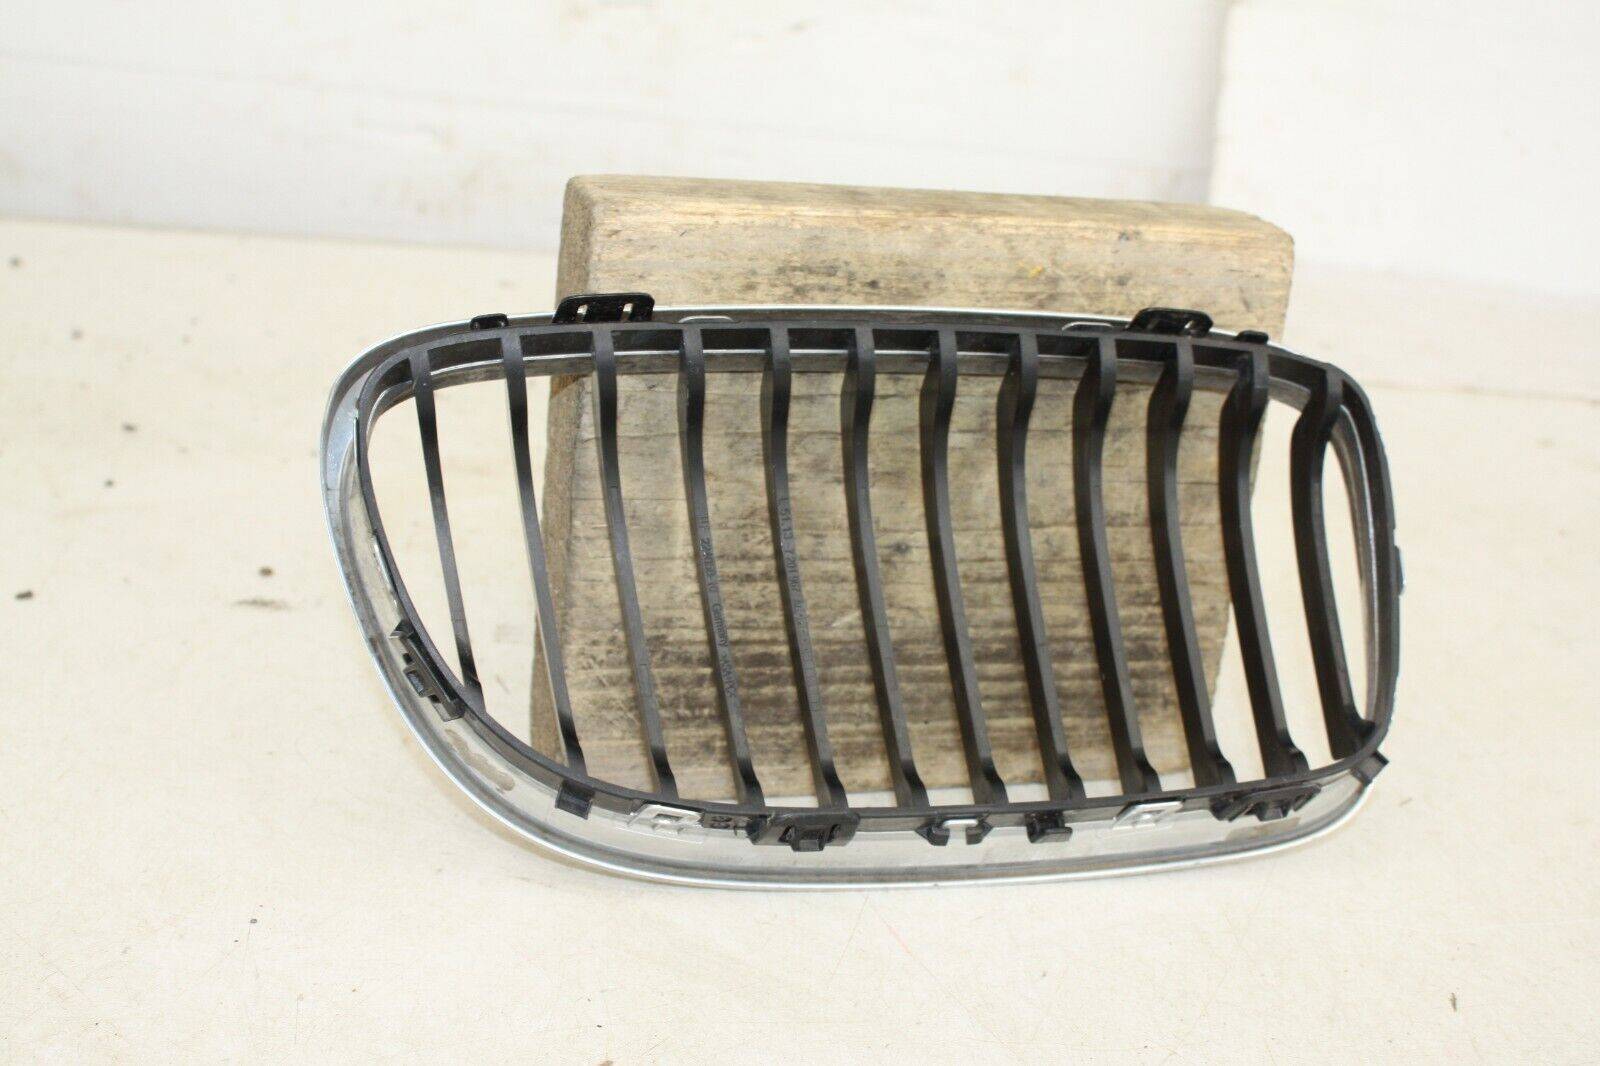 BMW-3-SERIES-FRONT-BUMPER-KIDNEY-GRILL-LEFT-2008-TO-2012-175367532000-8